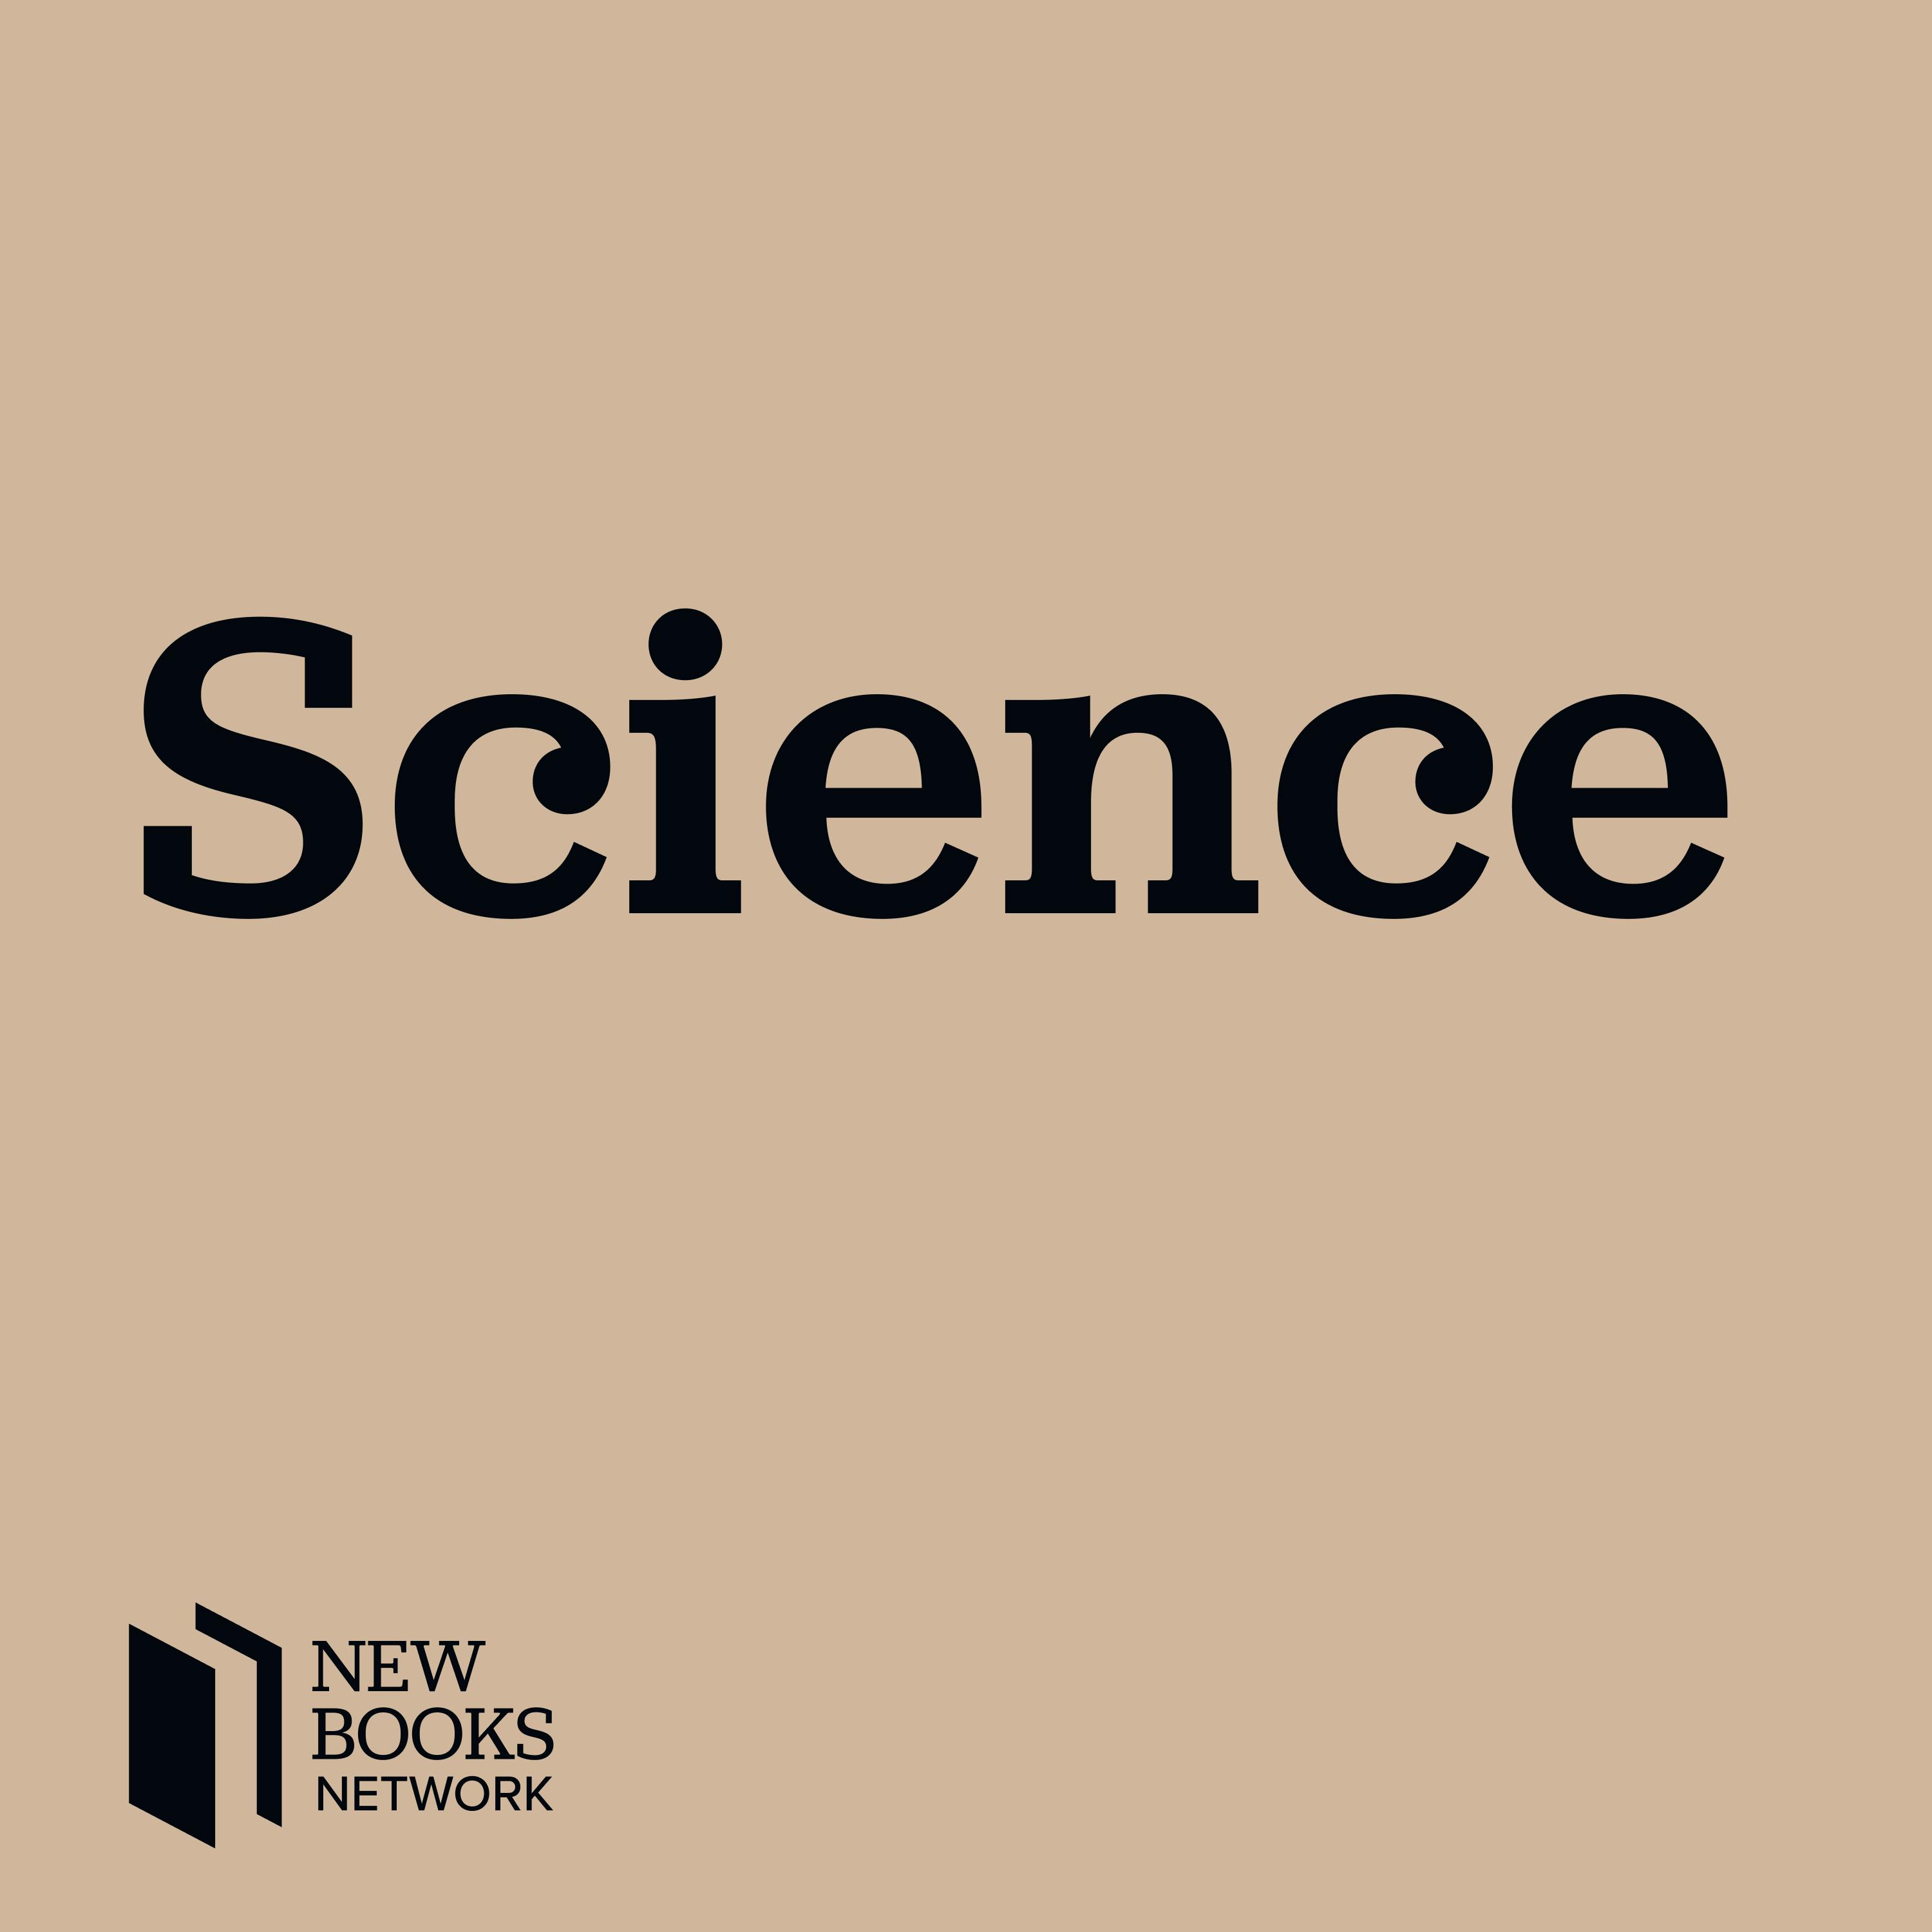 New Books in Science Image